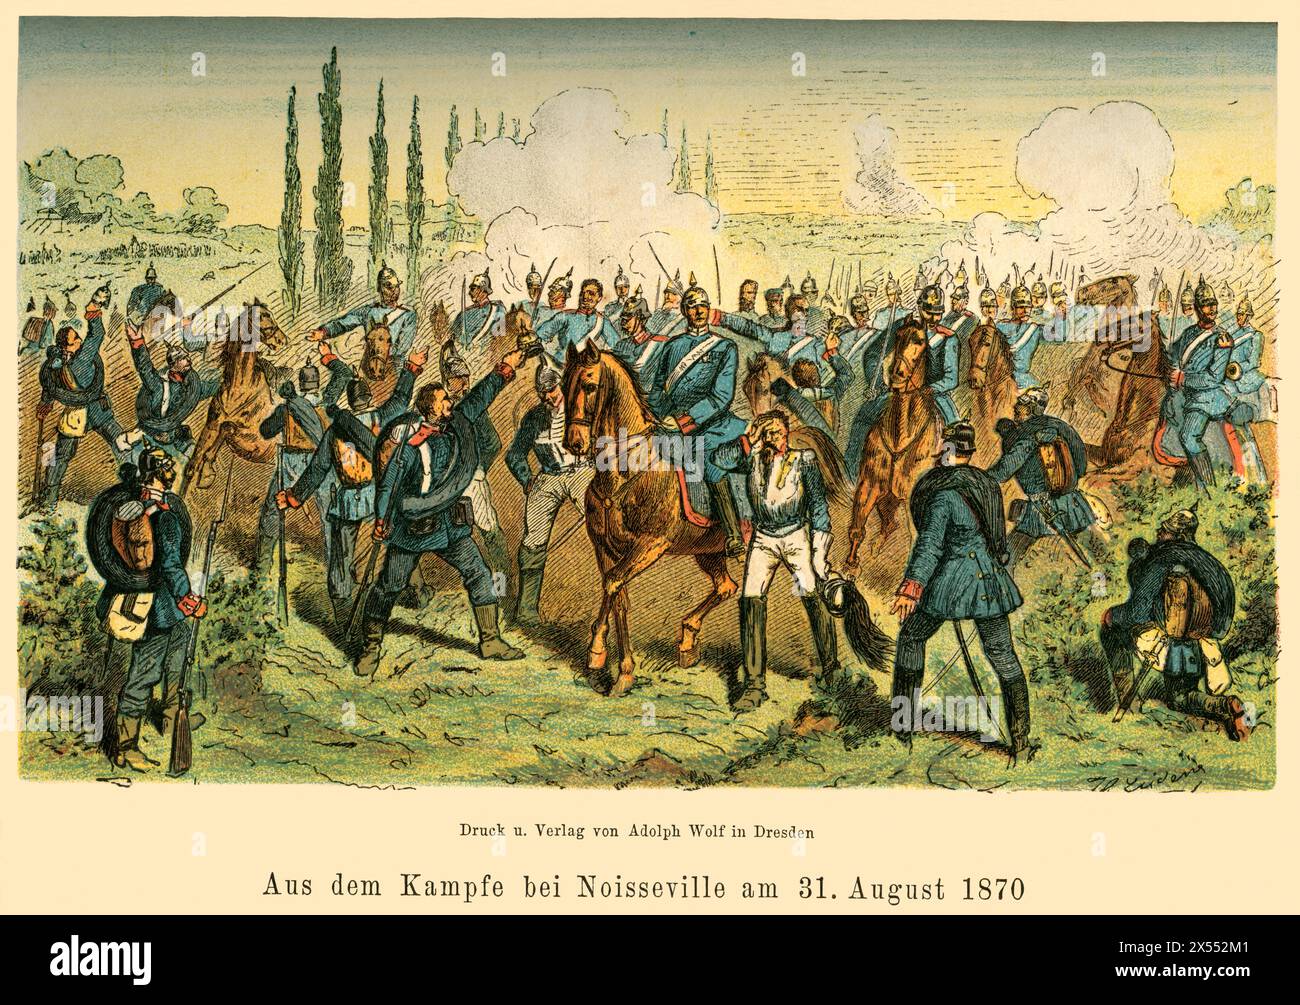 events, Noisseville, Franco-Prussion war, 1870-1871, ARTIST'S COPYRIGHT HAS NOT TO BE CLEARED Stock Photo